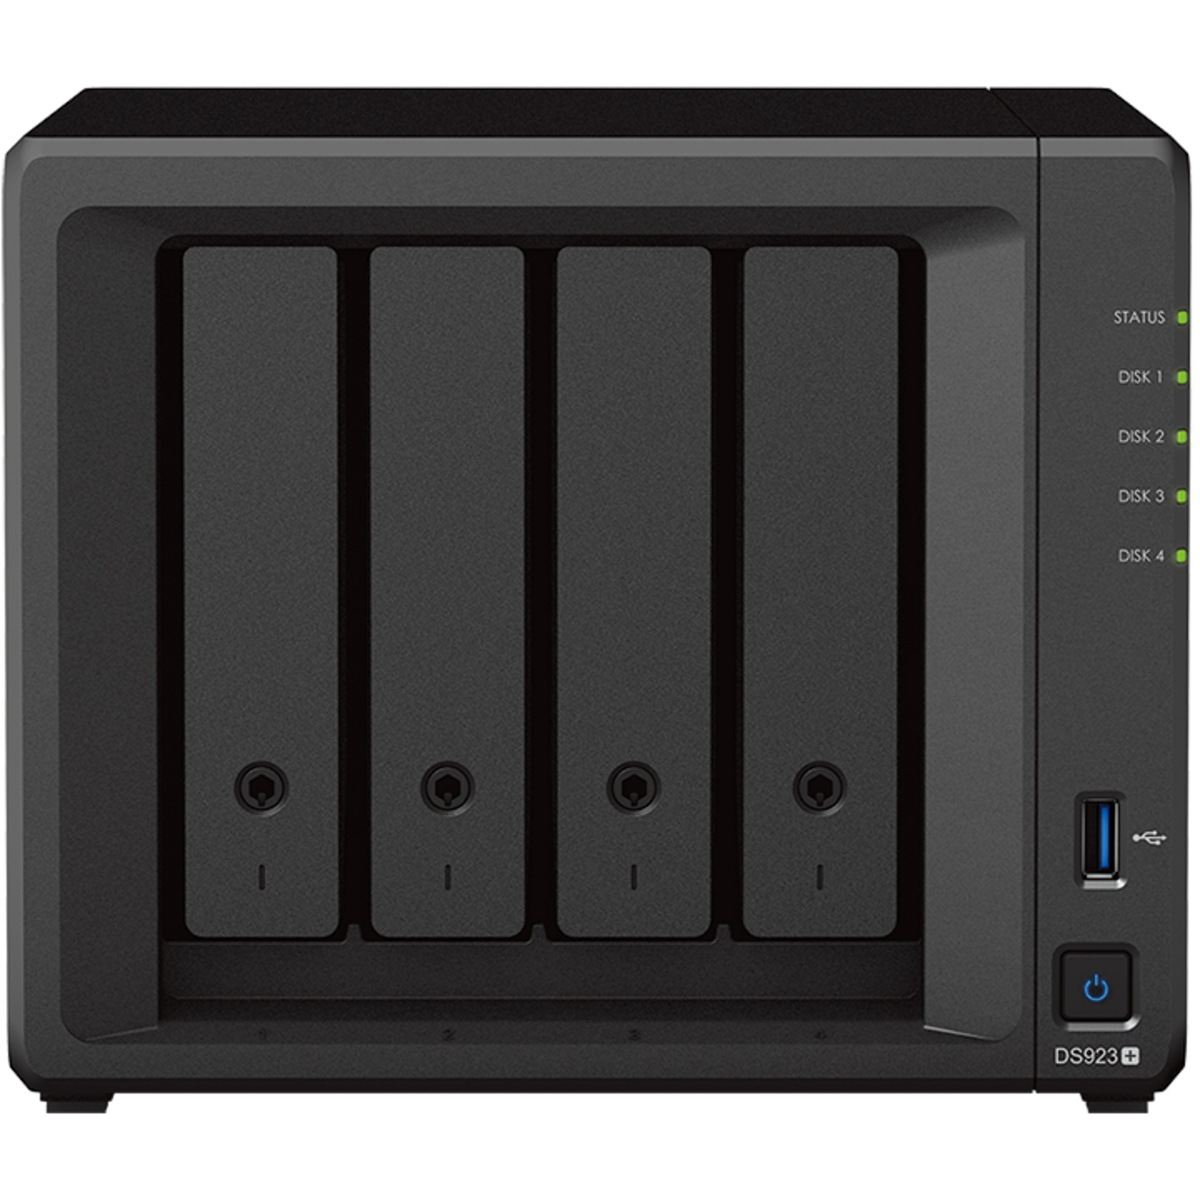 Synology DiskStation DS923+ 24tb 4-Bay Desktop Multimedia / Power User / Business NAS - Network Attached Storage Device 4x6tb Seagate IronWolf ST6000VN006 3.5 5400rpm SATA 6Gb/s HDD NAS Class Drives Installed - Burn-In Tested - ON SALE - FREE RAM UPGRADE DiskStation DS923+